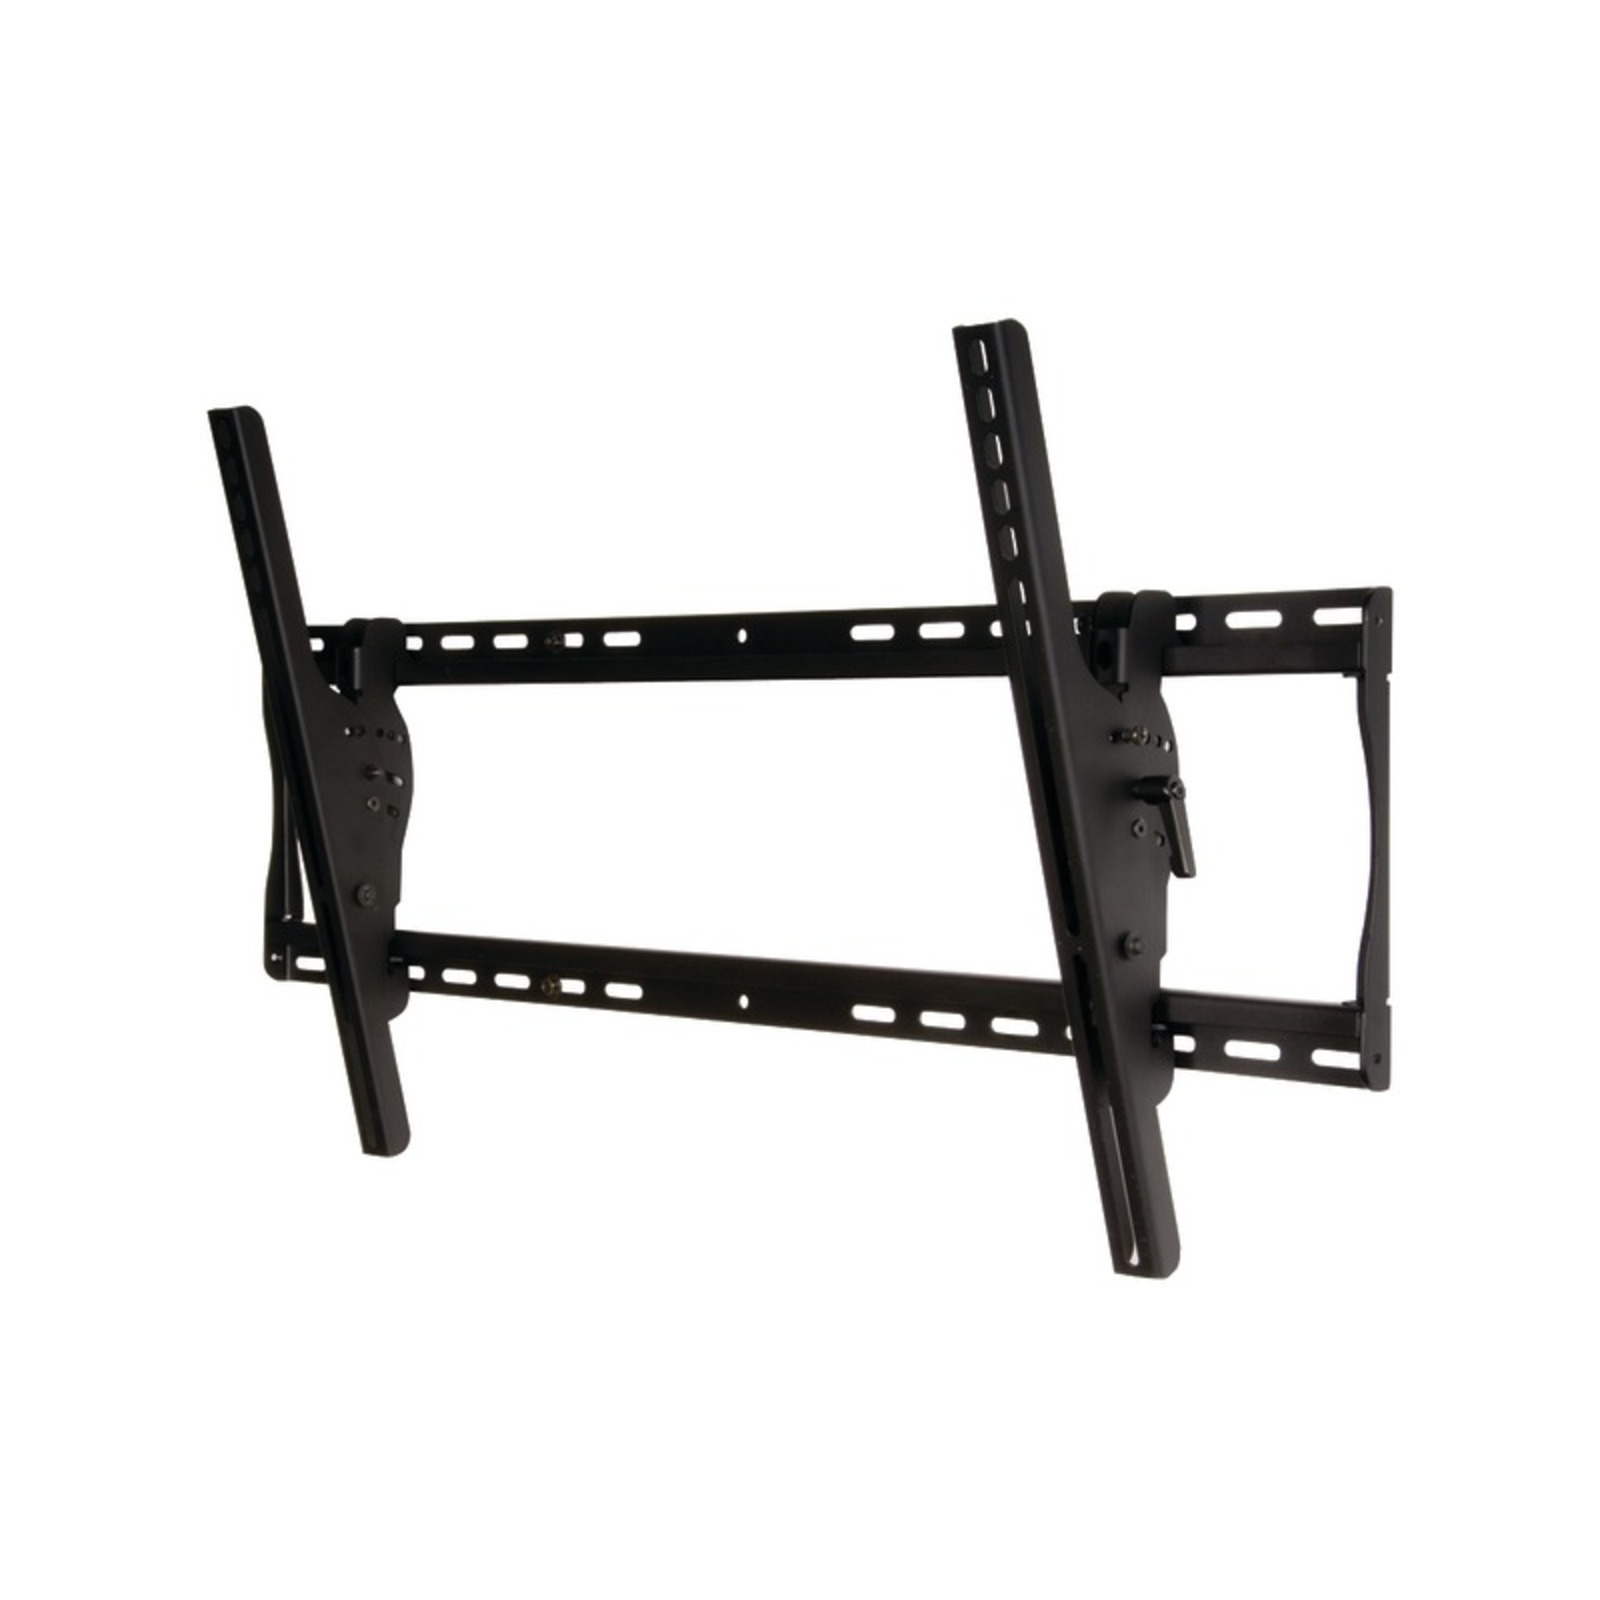 Peerless Industries, Inc. ST660P 37" to 63" for Universal Tilt Wall Mount